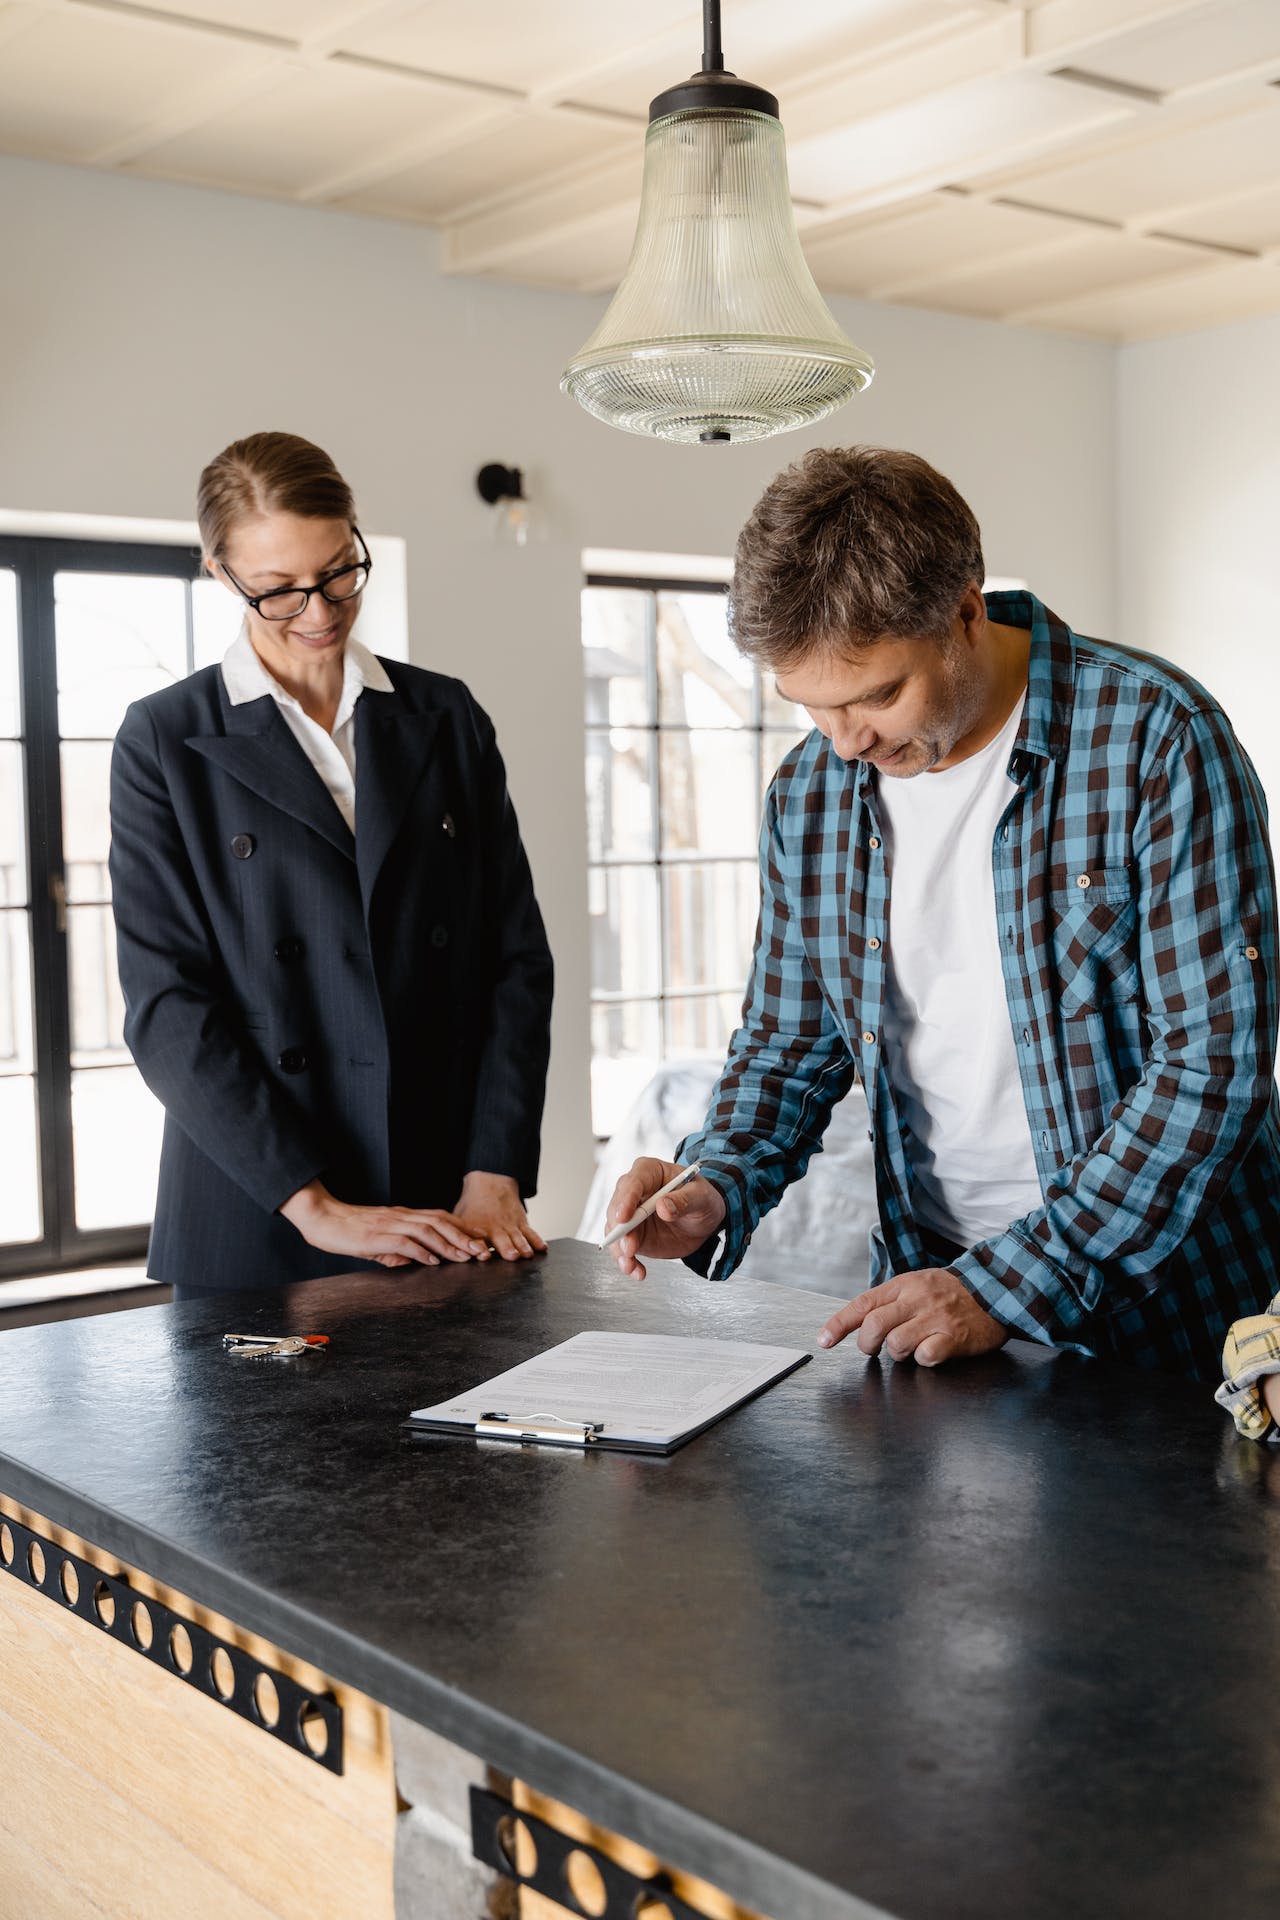 Can You Switch Apartment Units After Signing Lease? Understanding Your Rights